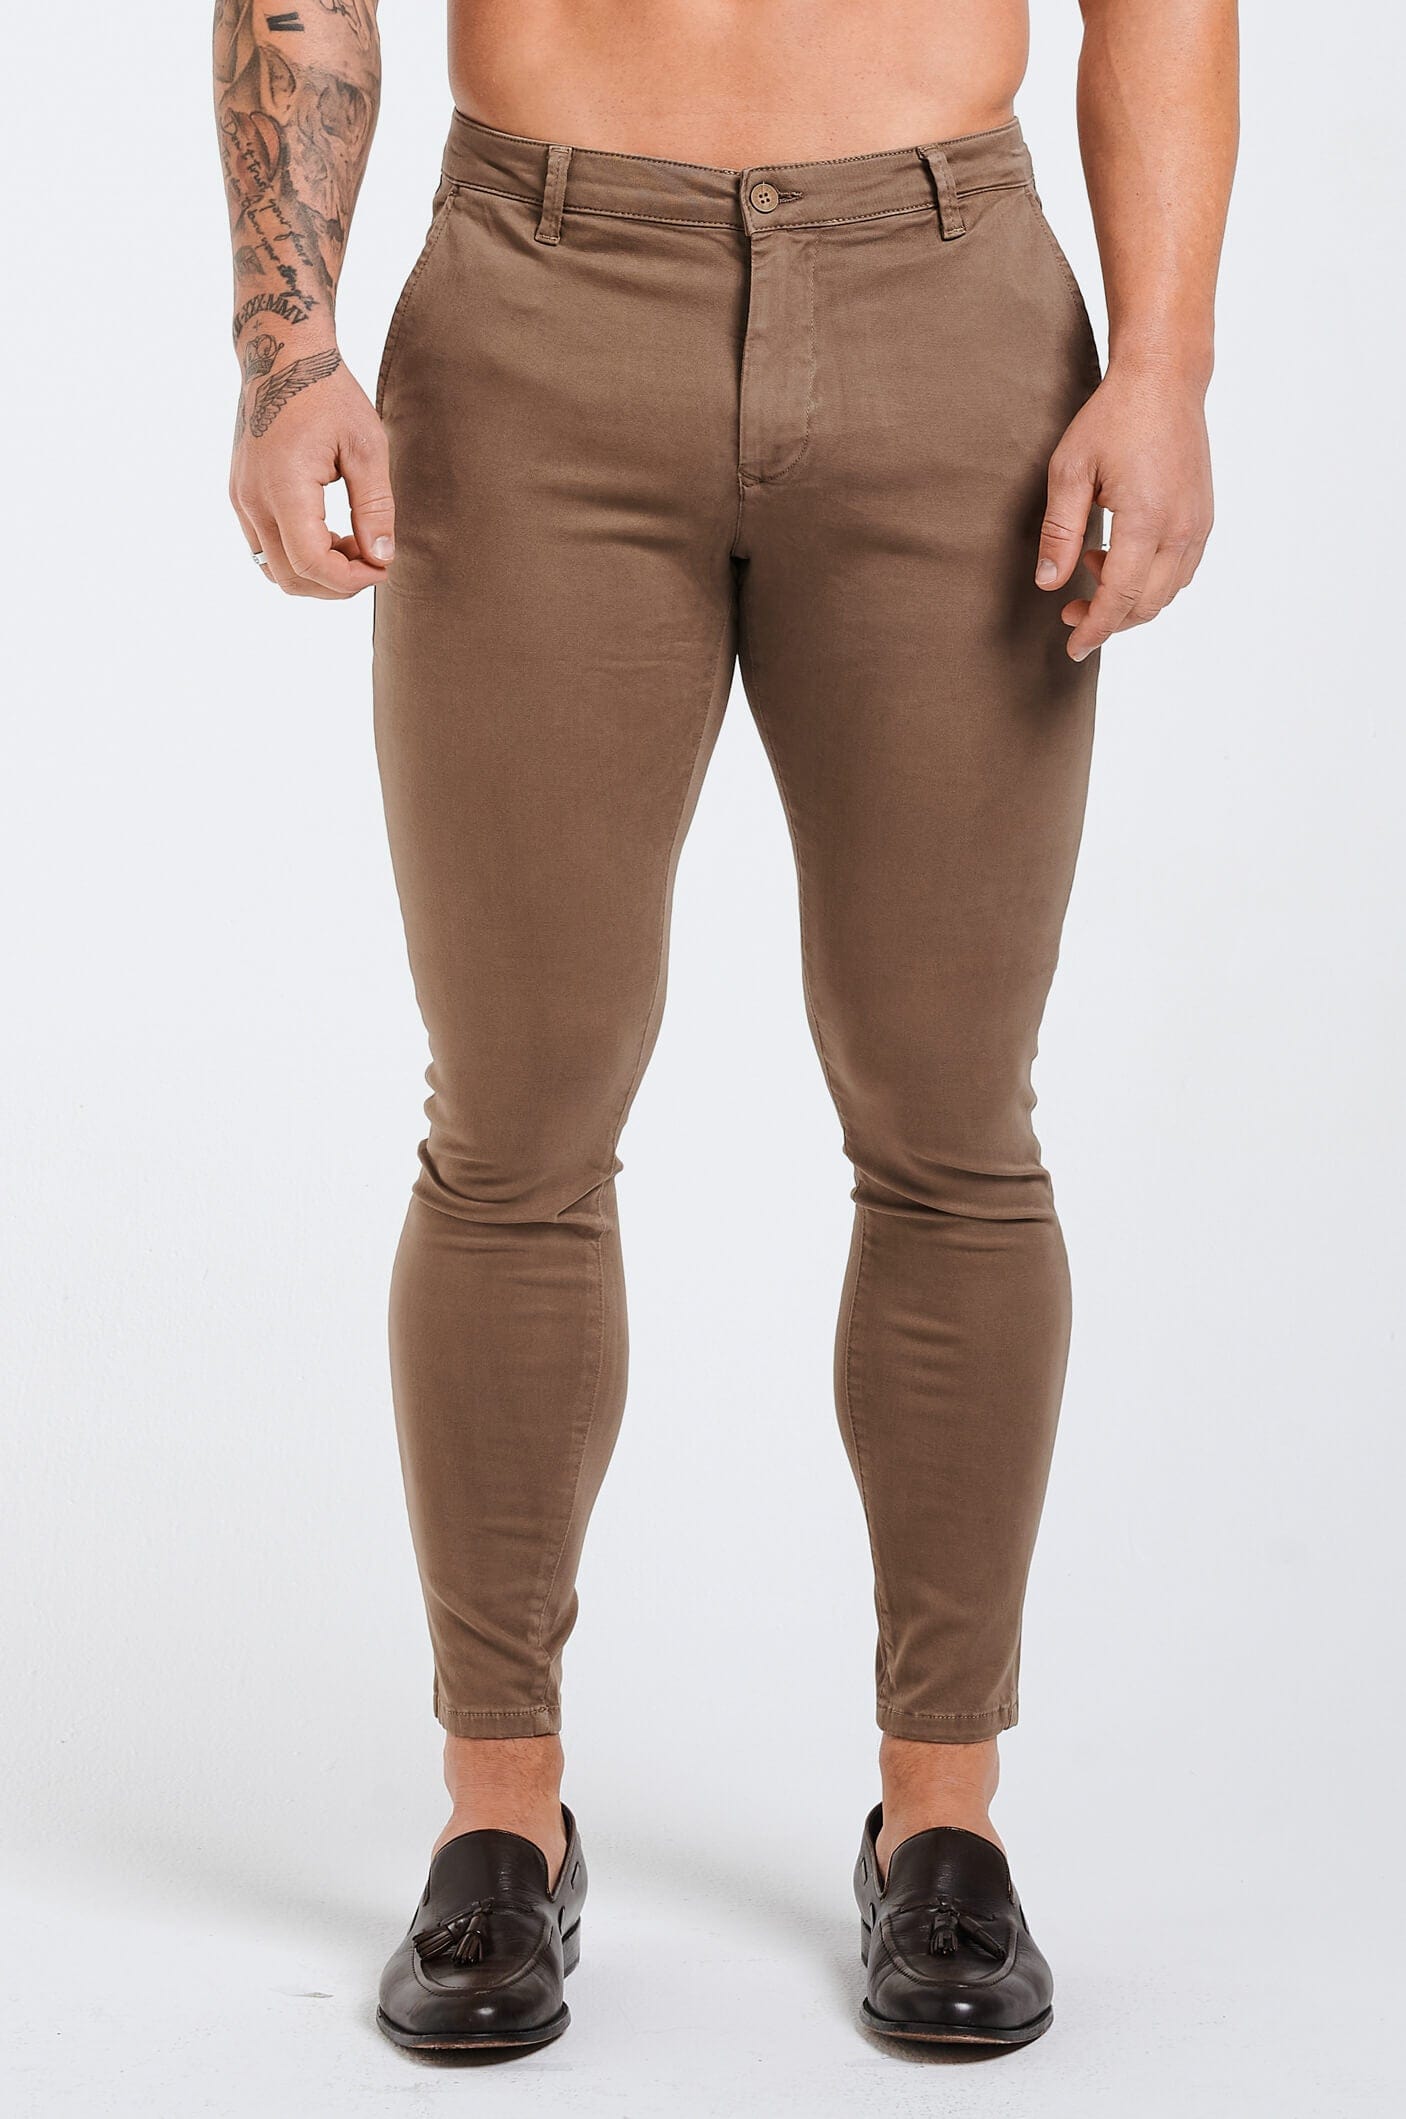 Legend London Trousers - chino SPRAY-ON STRETCH CHINO - TAUPE